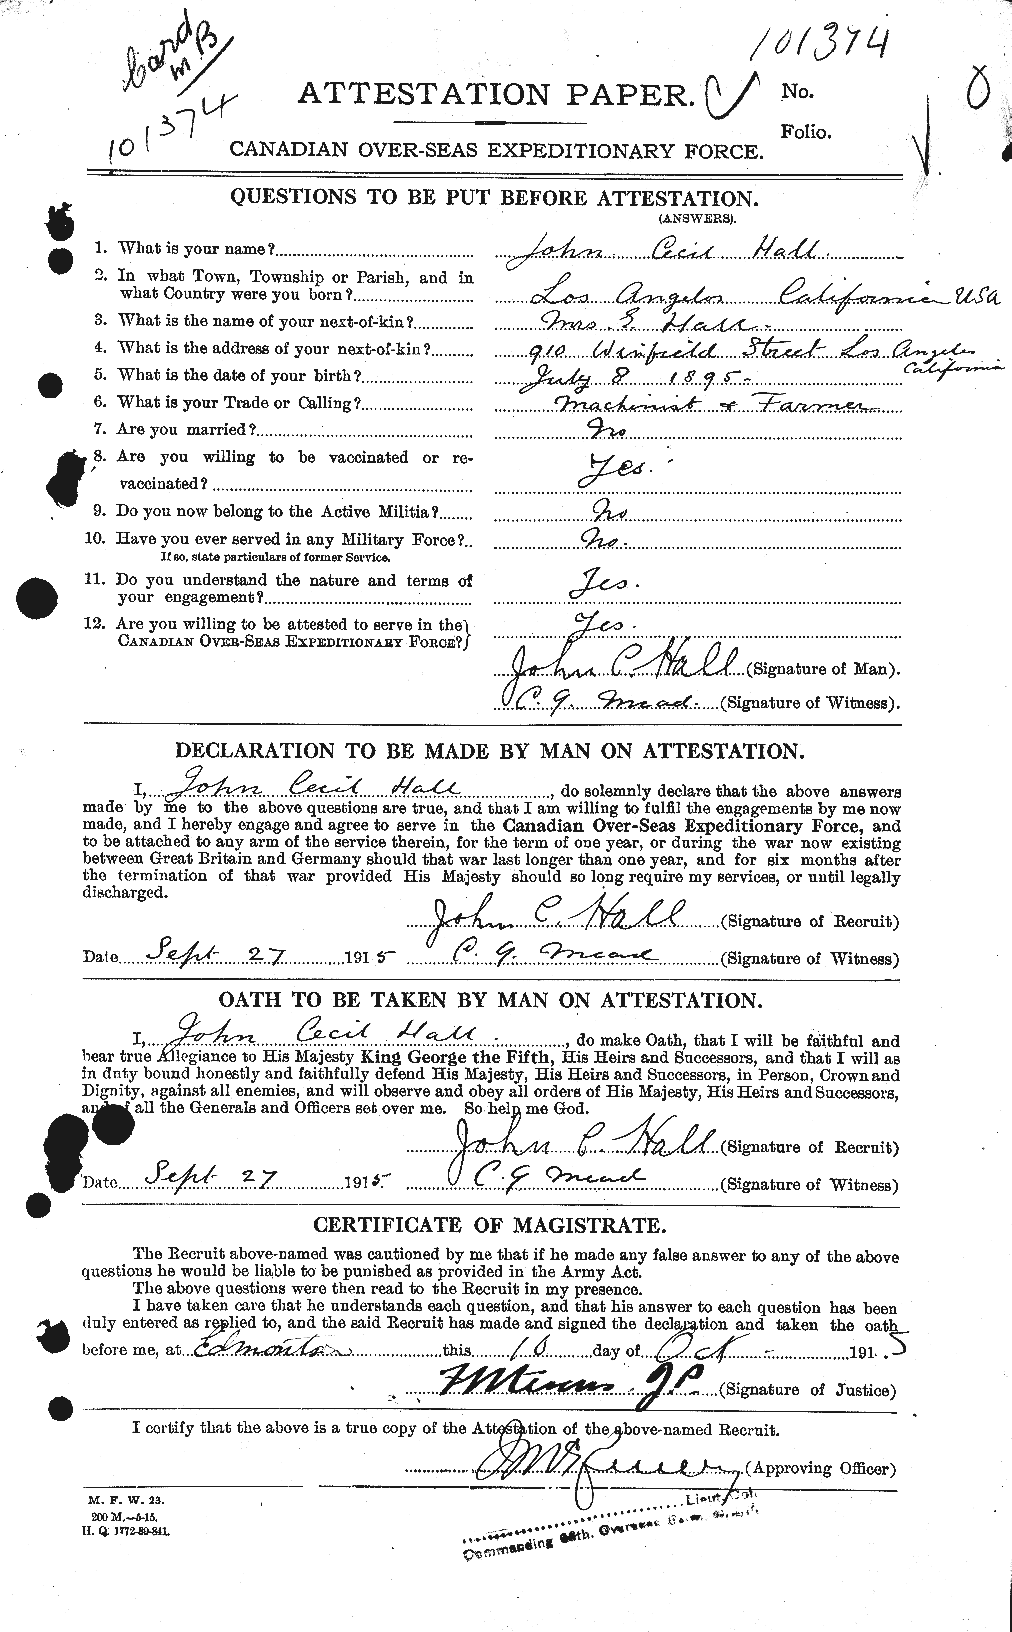 Personnel Records of the First World War - CEF 374276a